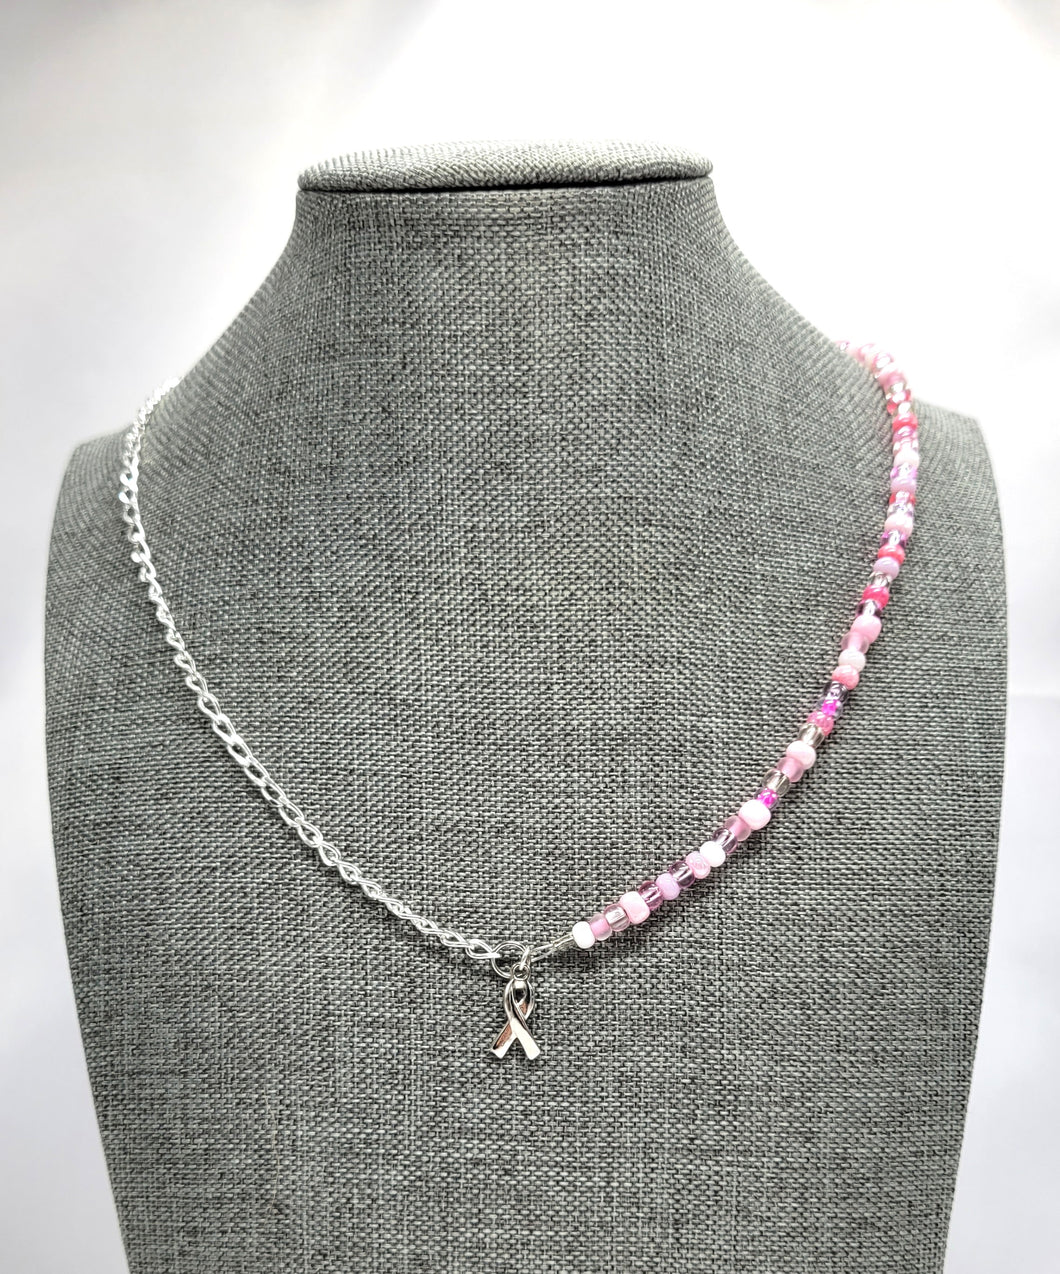 Breast Cancer Awareness Necklace